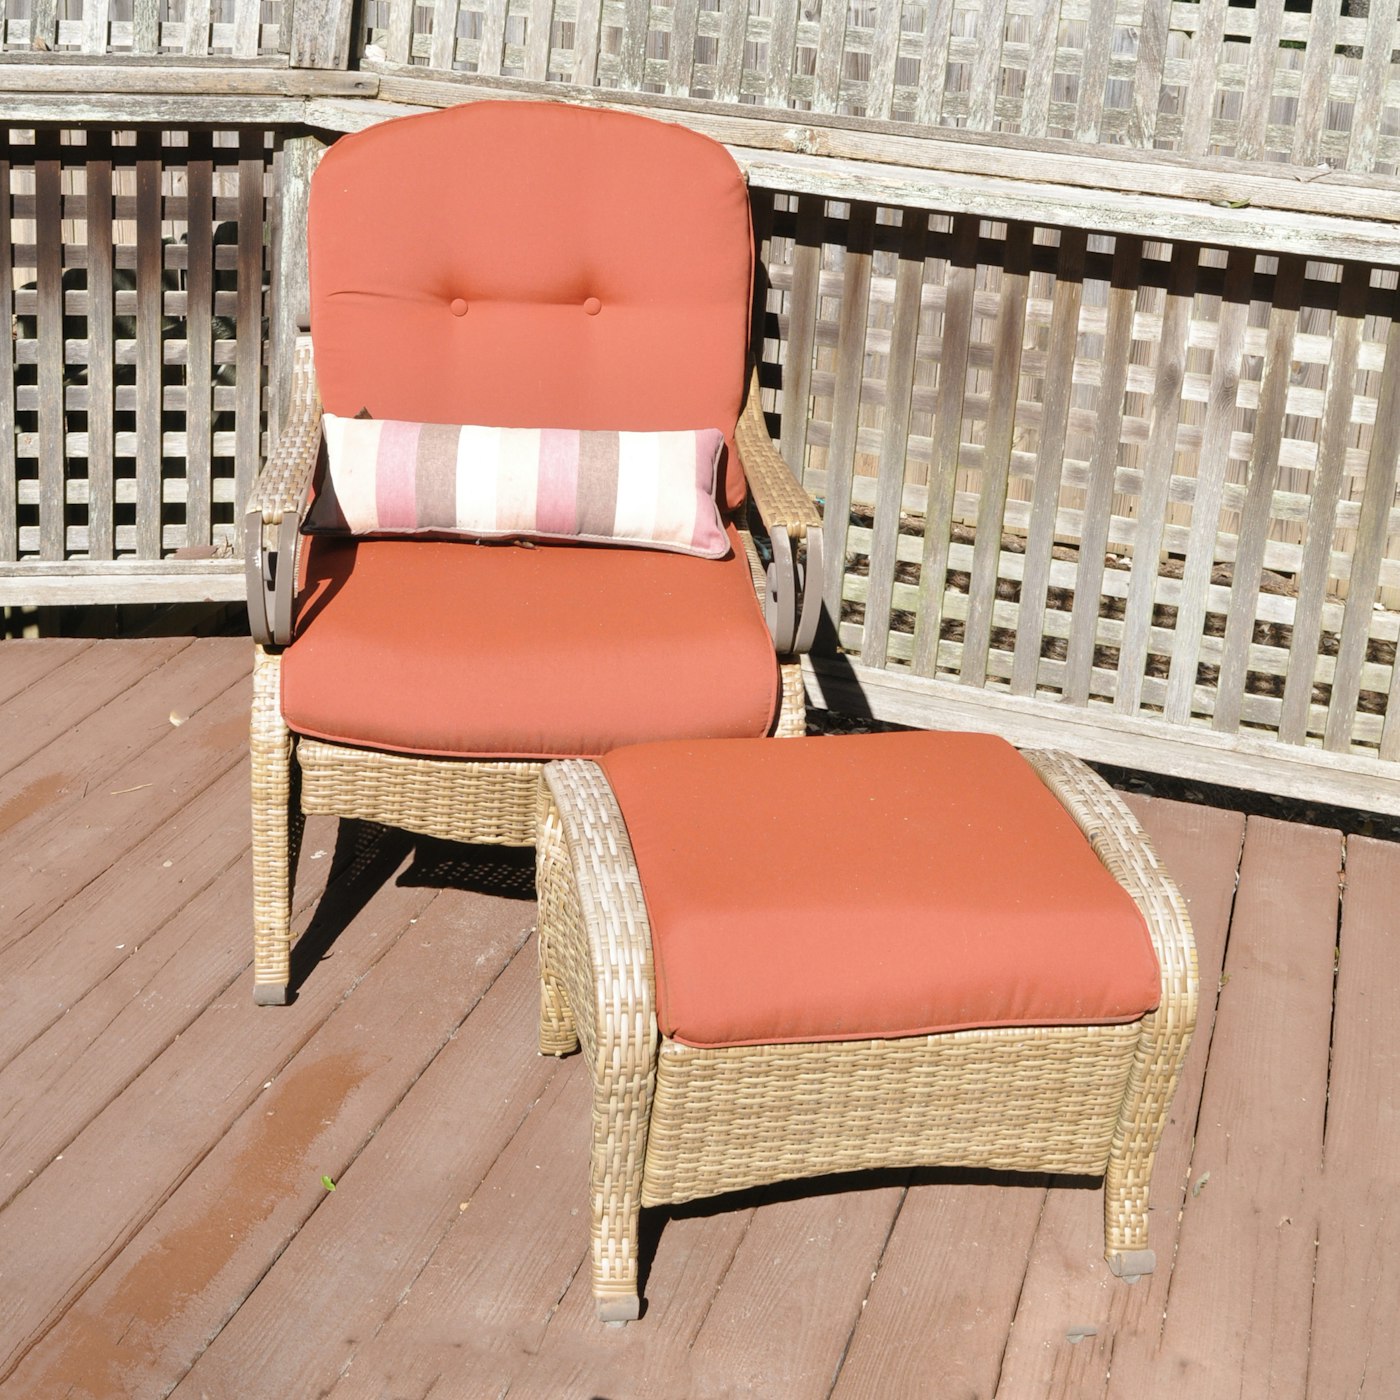 Wicker Patio Chair and Matching Ottoman | EBTH